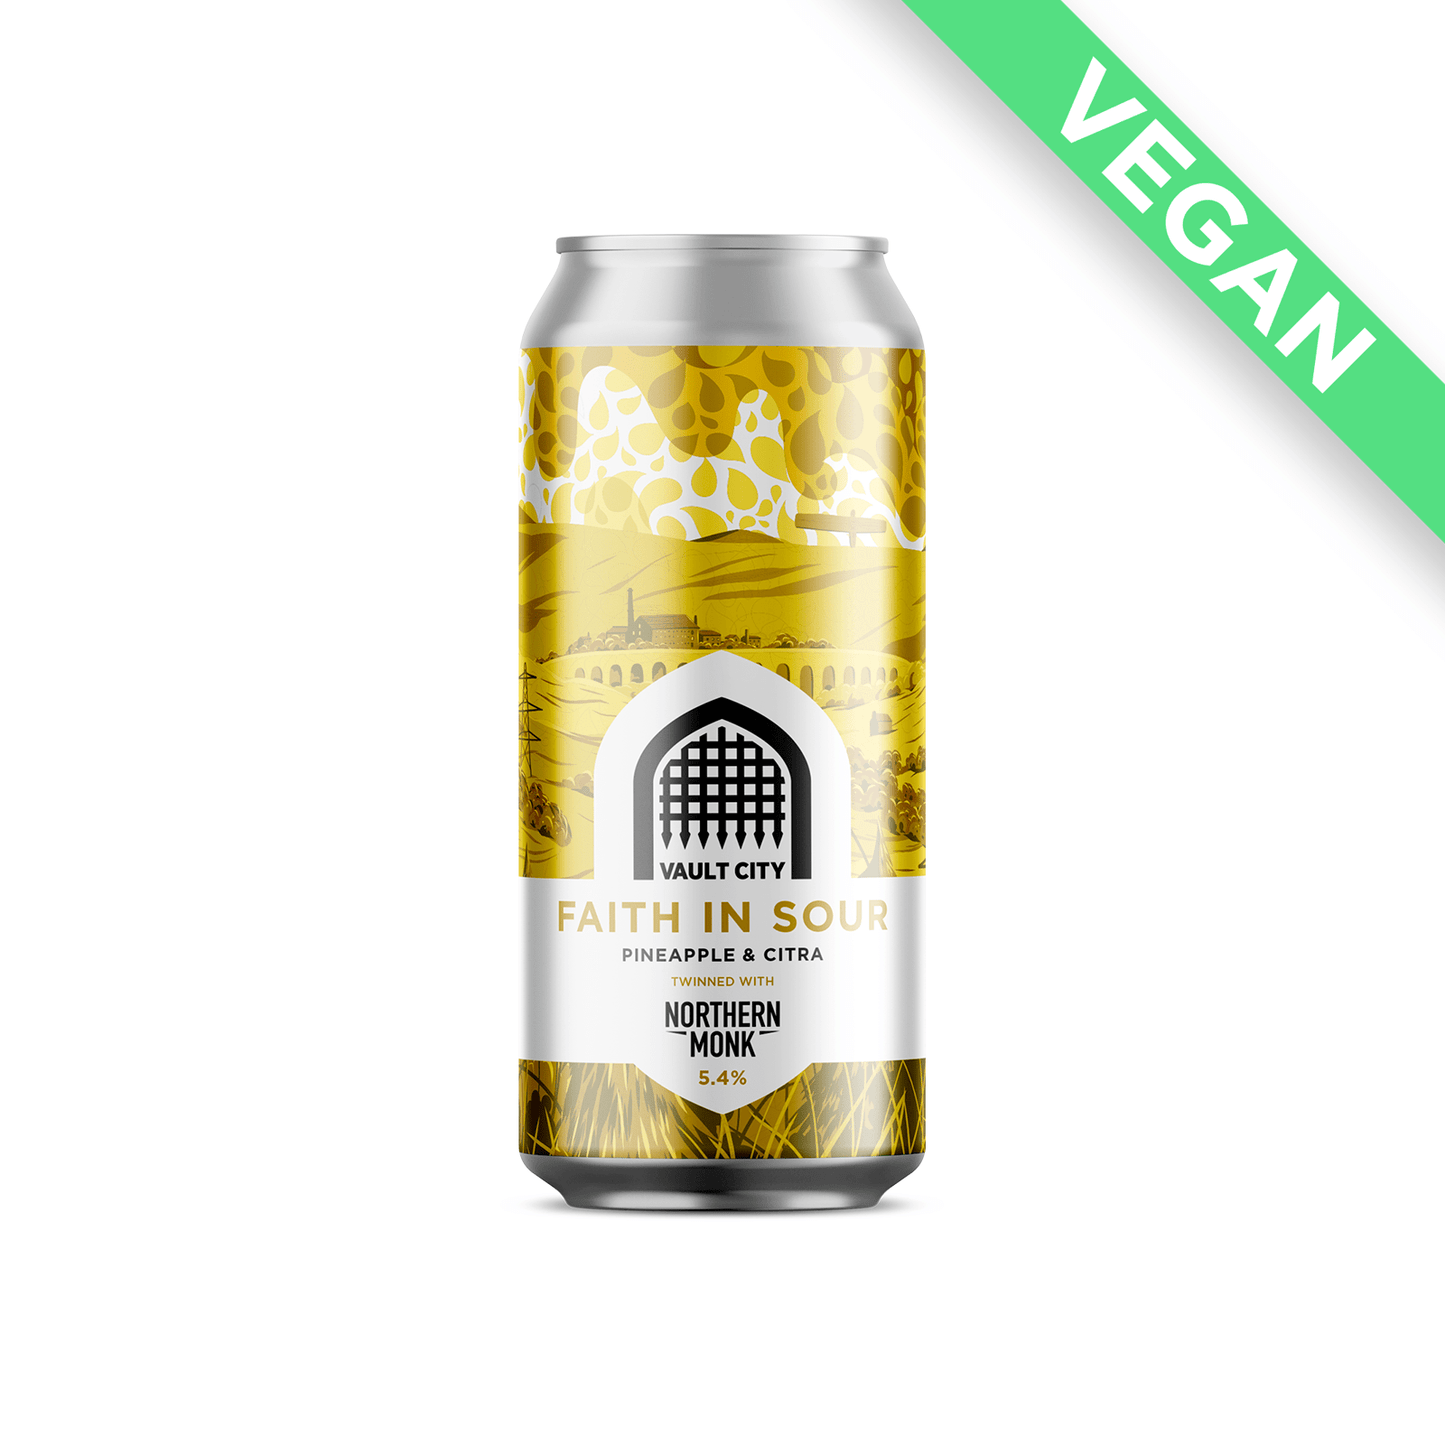 Faith in Sour, Pineapple & Citra - Vault City x Northern Monk